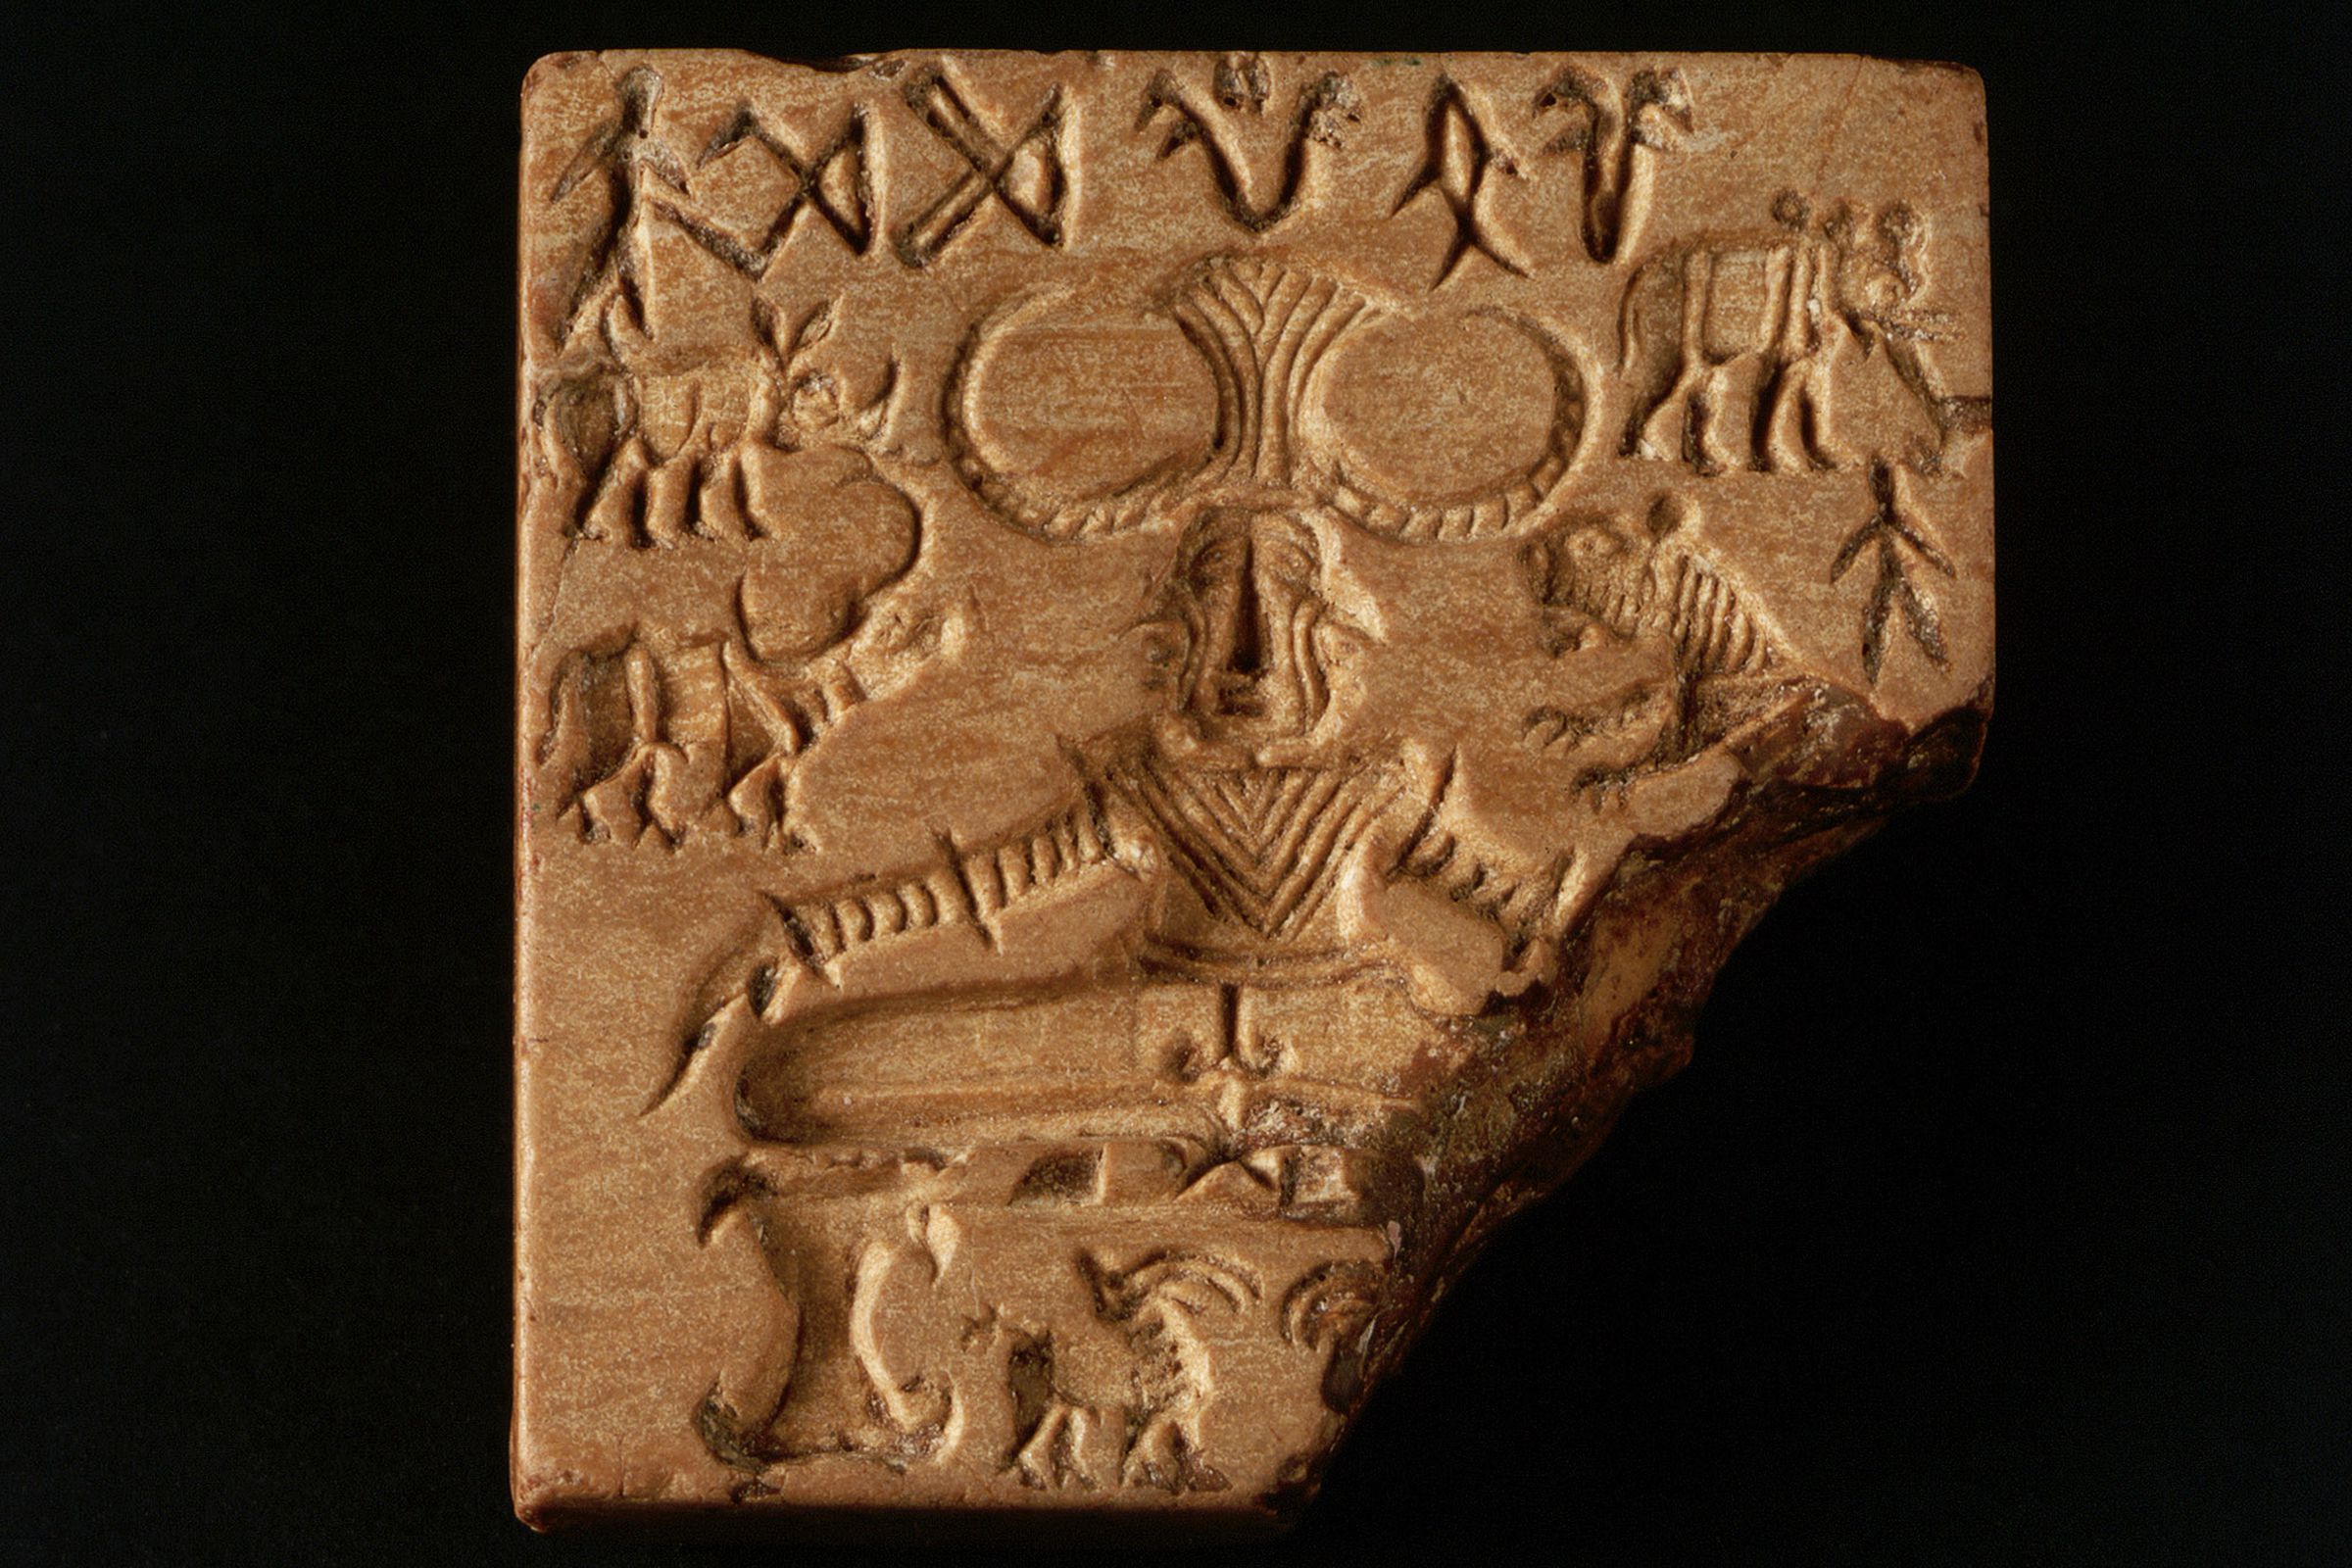 This seal comes from the Indus Valley Civilization and is currently housed in the National Museum of New Delhi.